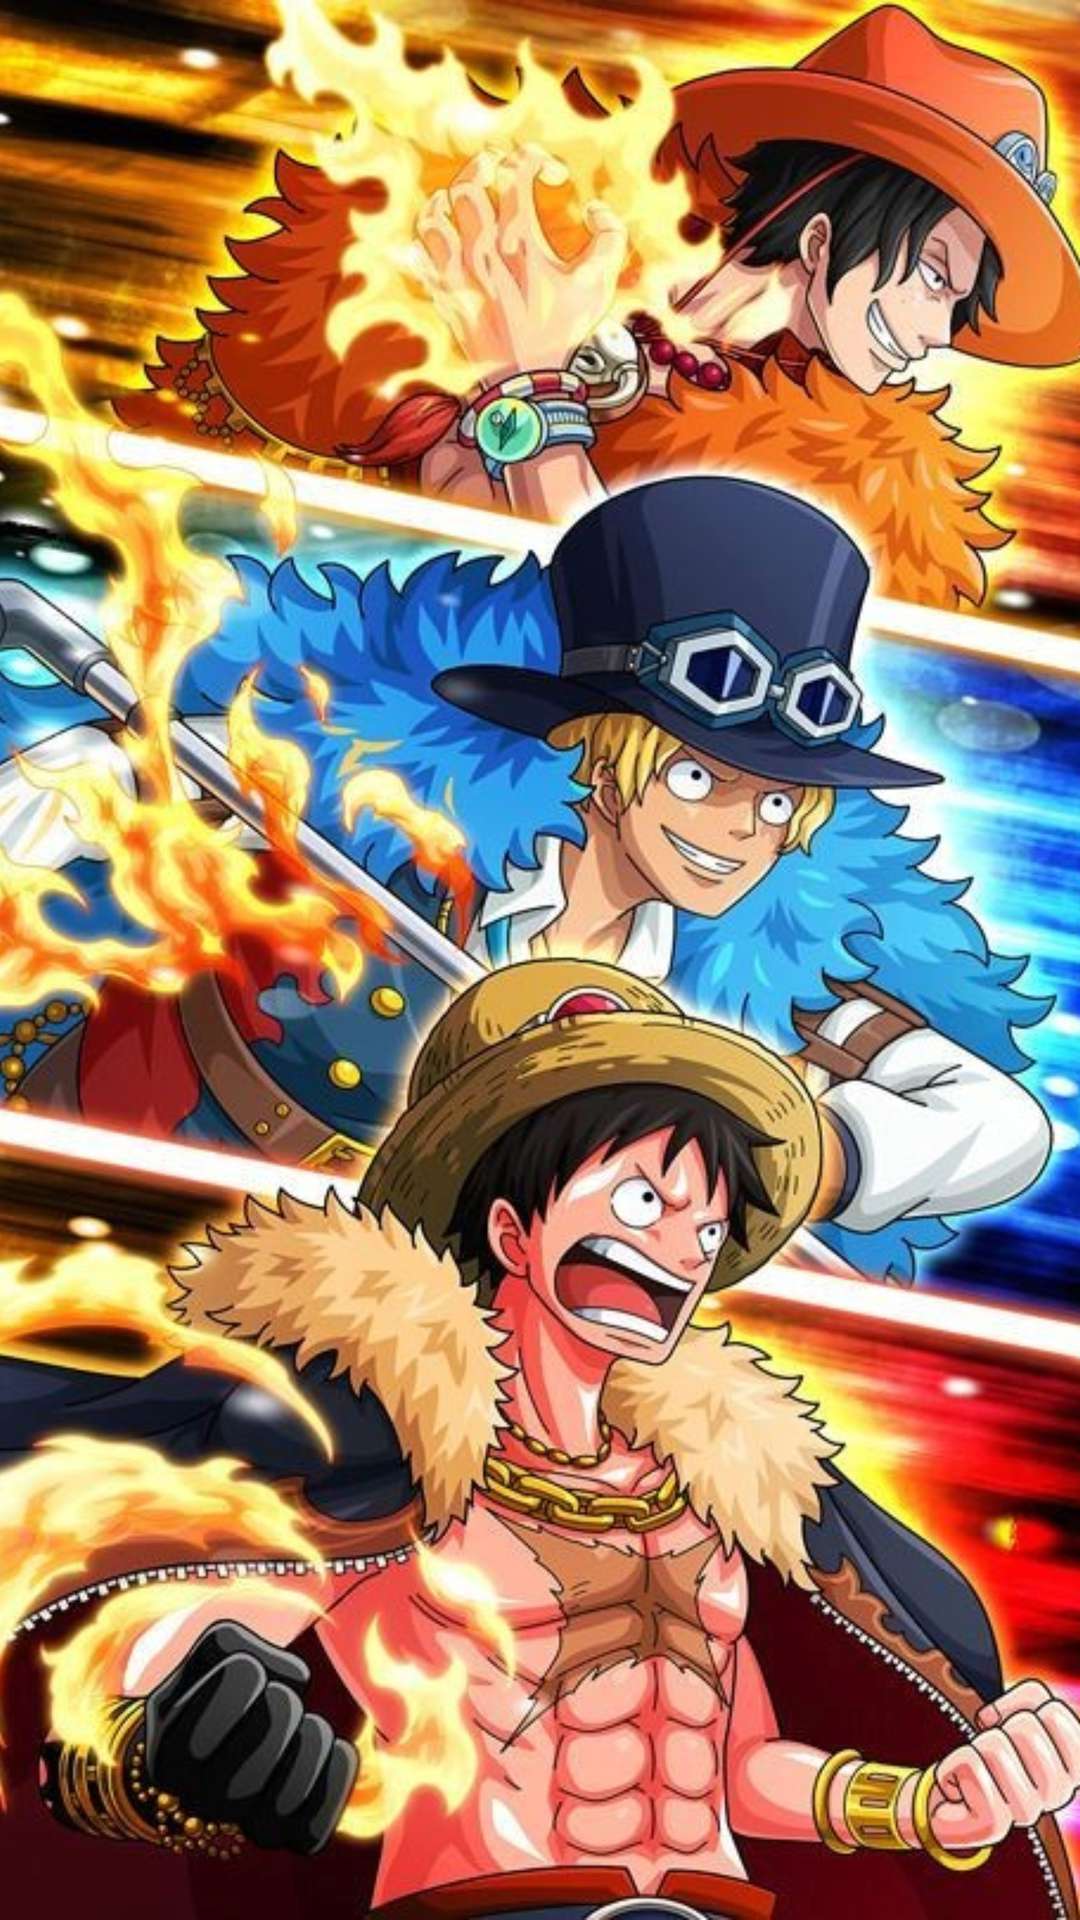 Wallpaper ID 102375  One Piece Monkey D Luffy Sabo Portgas D Ace  free download